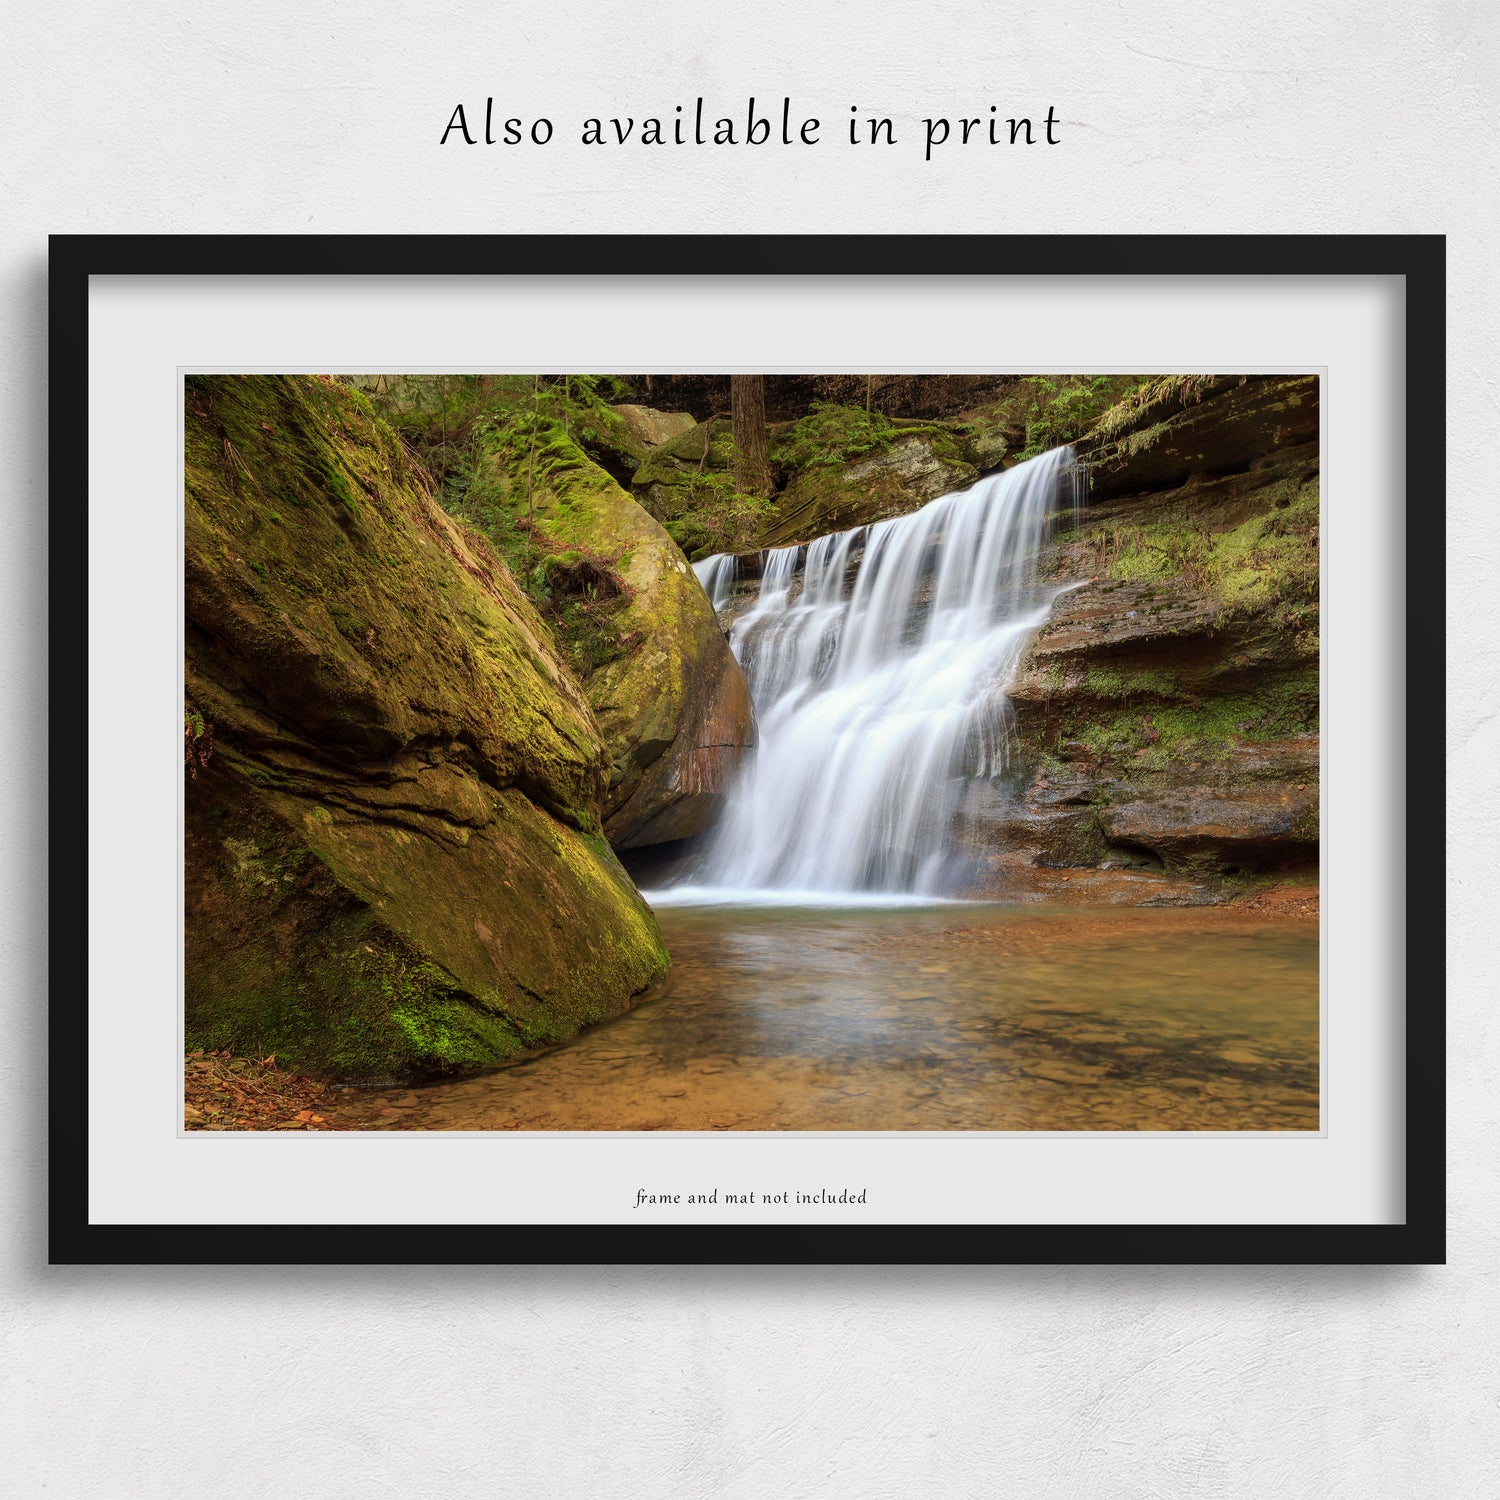 The photograph is beautifully presented as a framed print, showing this photograph is also available as a paper print. Please note that the frame and mat shown are for display purposes only and are not included in the purchase.